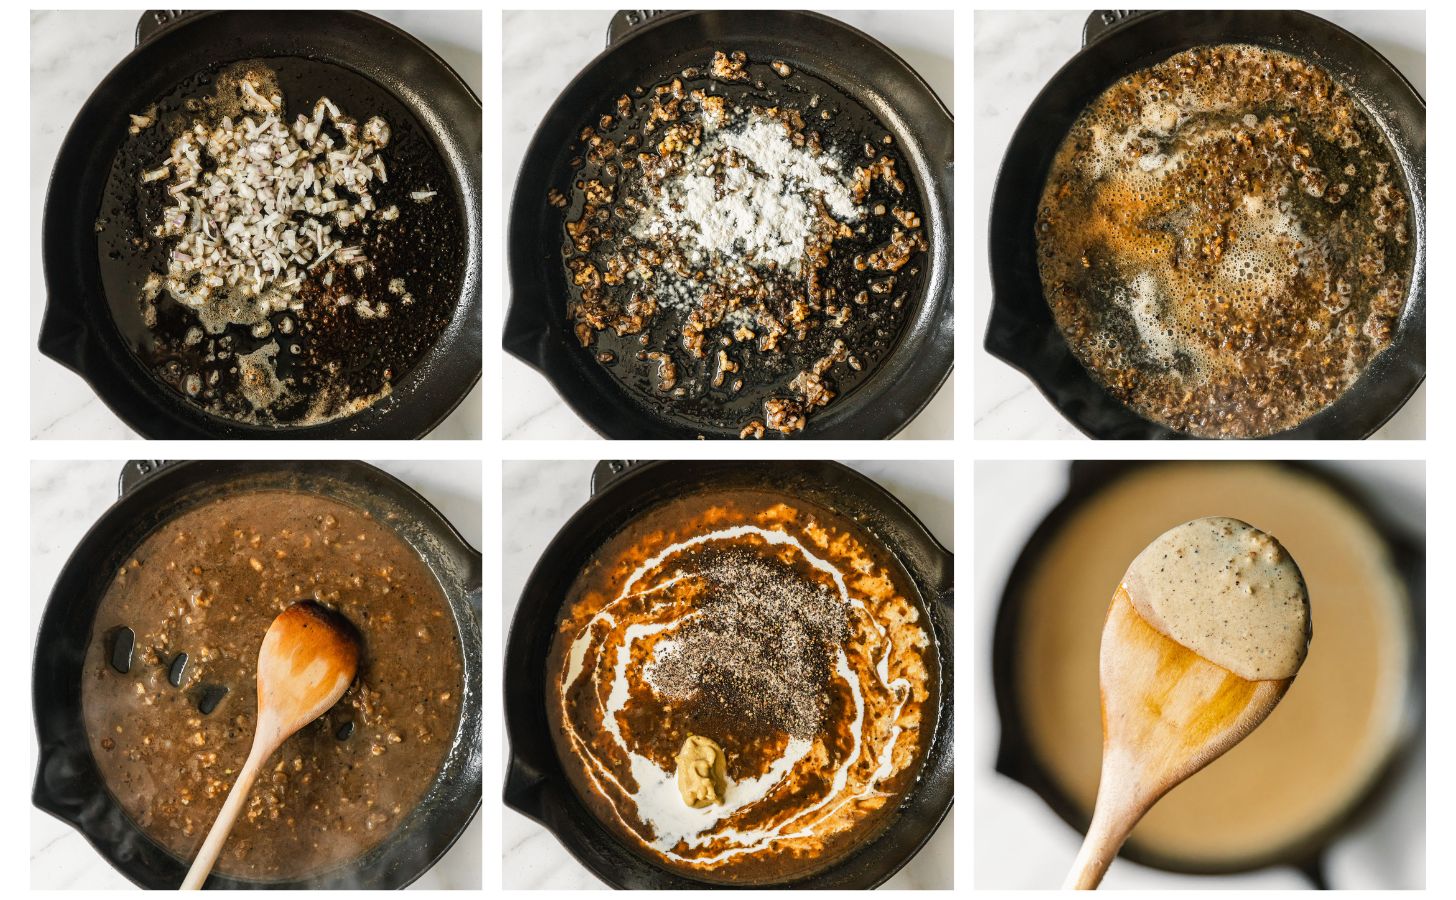 Six steps to making brandy peppercorn sauce. In photo 1, shallots are cooking in a cast iron skillet. In photo 2, the shallots are topped with flour. In photo 3, the pan has brandy in it. In photo 4, a wood spoon is stirring beef broth into the sauce. In photo 5, the sauce has cream, Dijon, and peppercorns. In photo 6, a wood spoon is coated in the sauce.